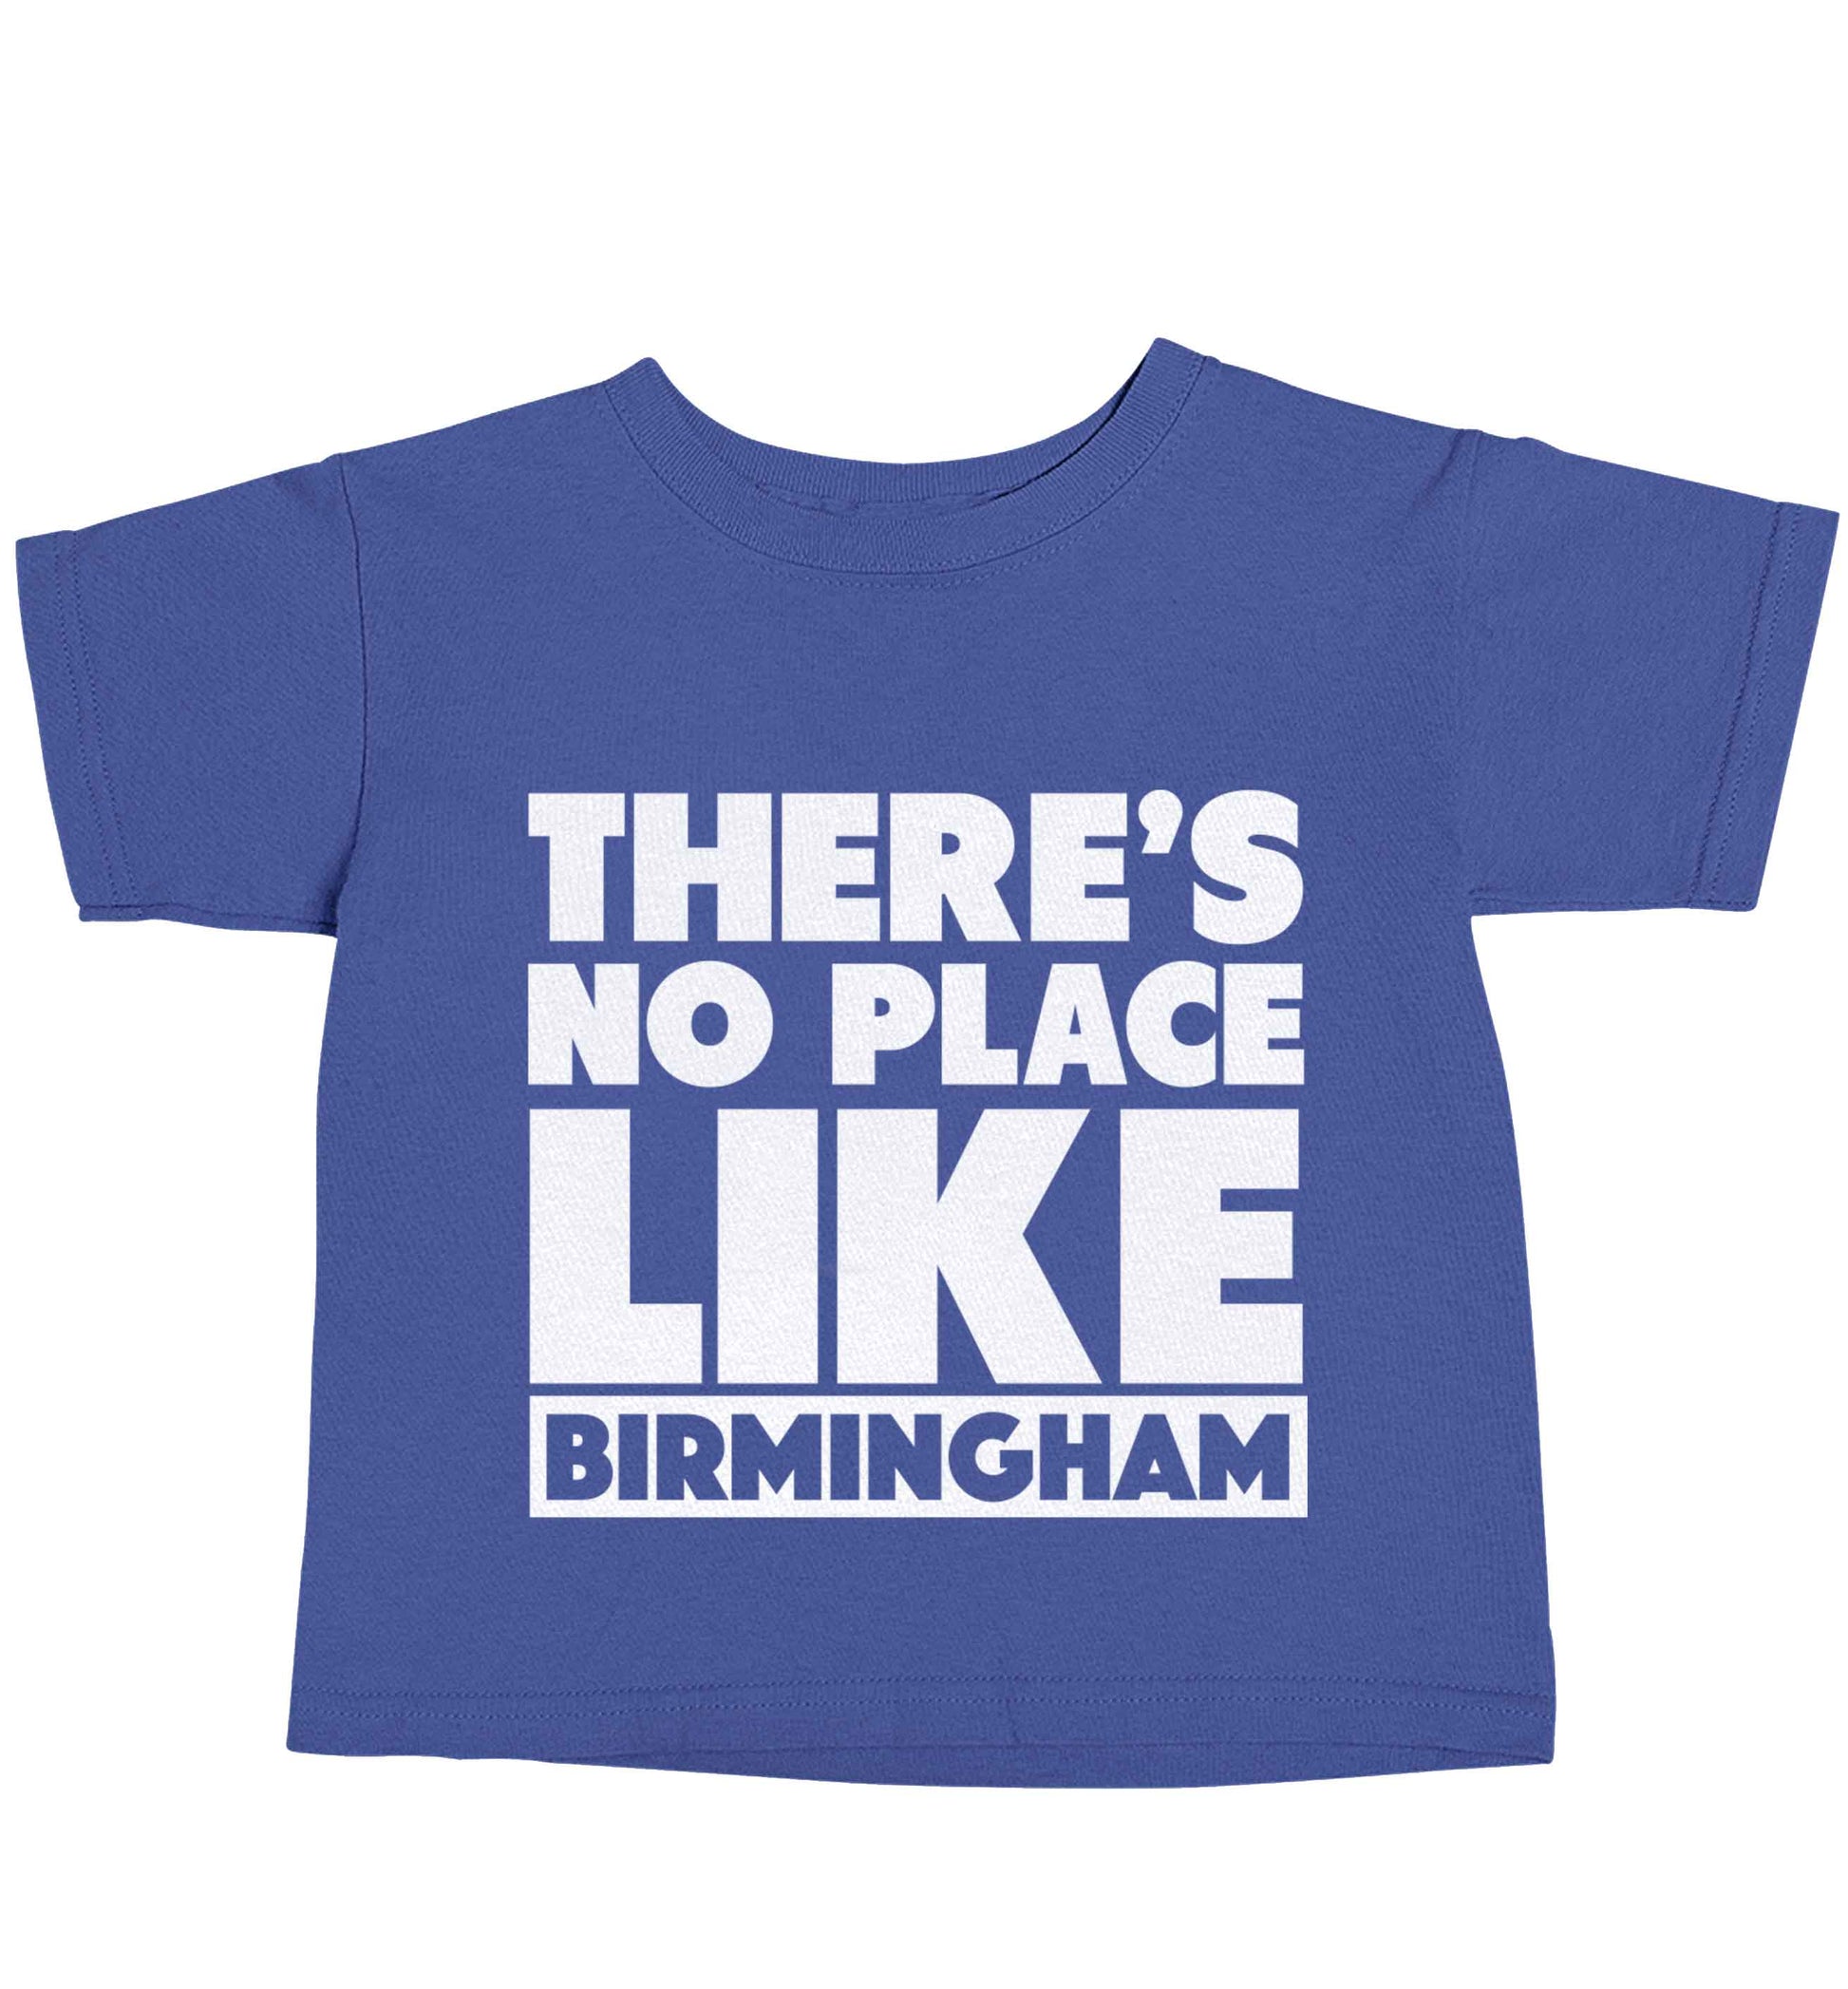 There's no place like Birmingham blue baby toddler Tshirt 2 Years